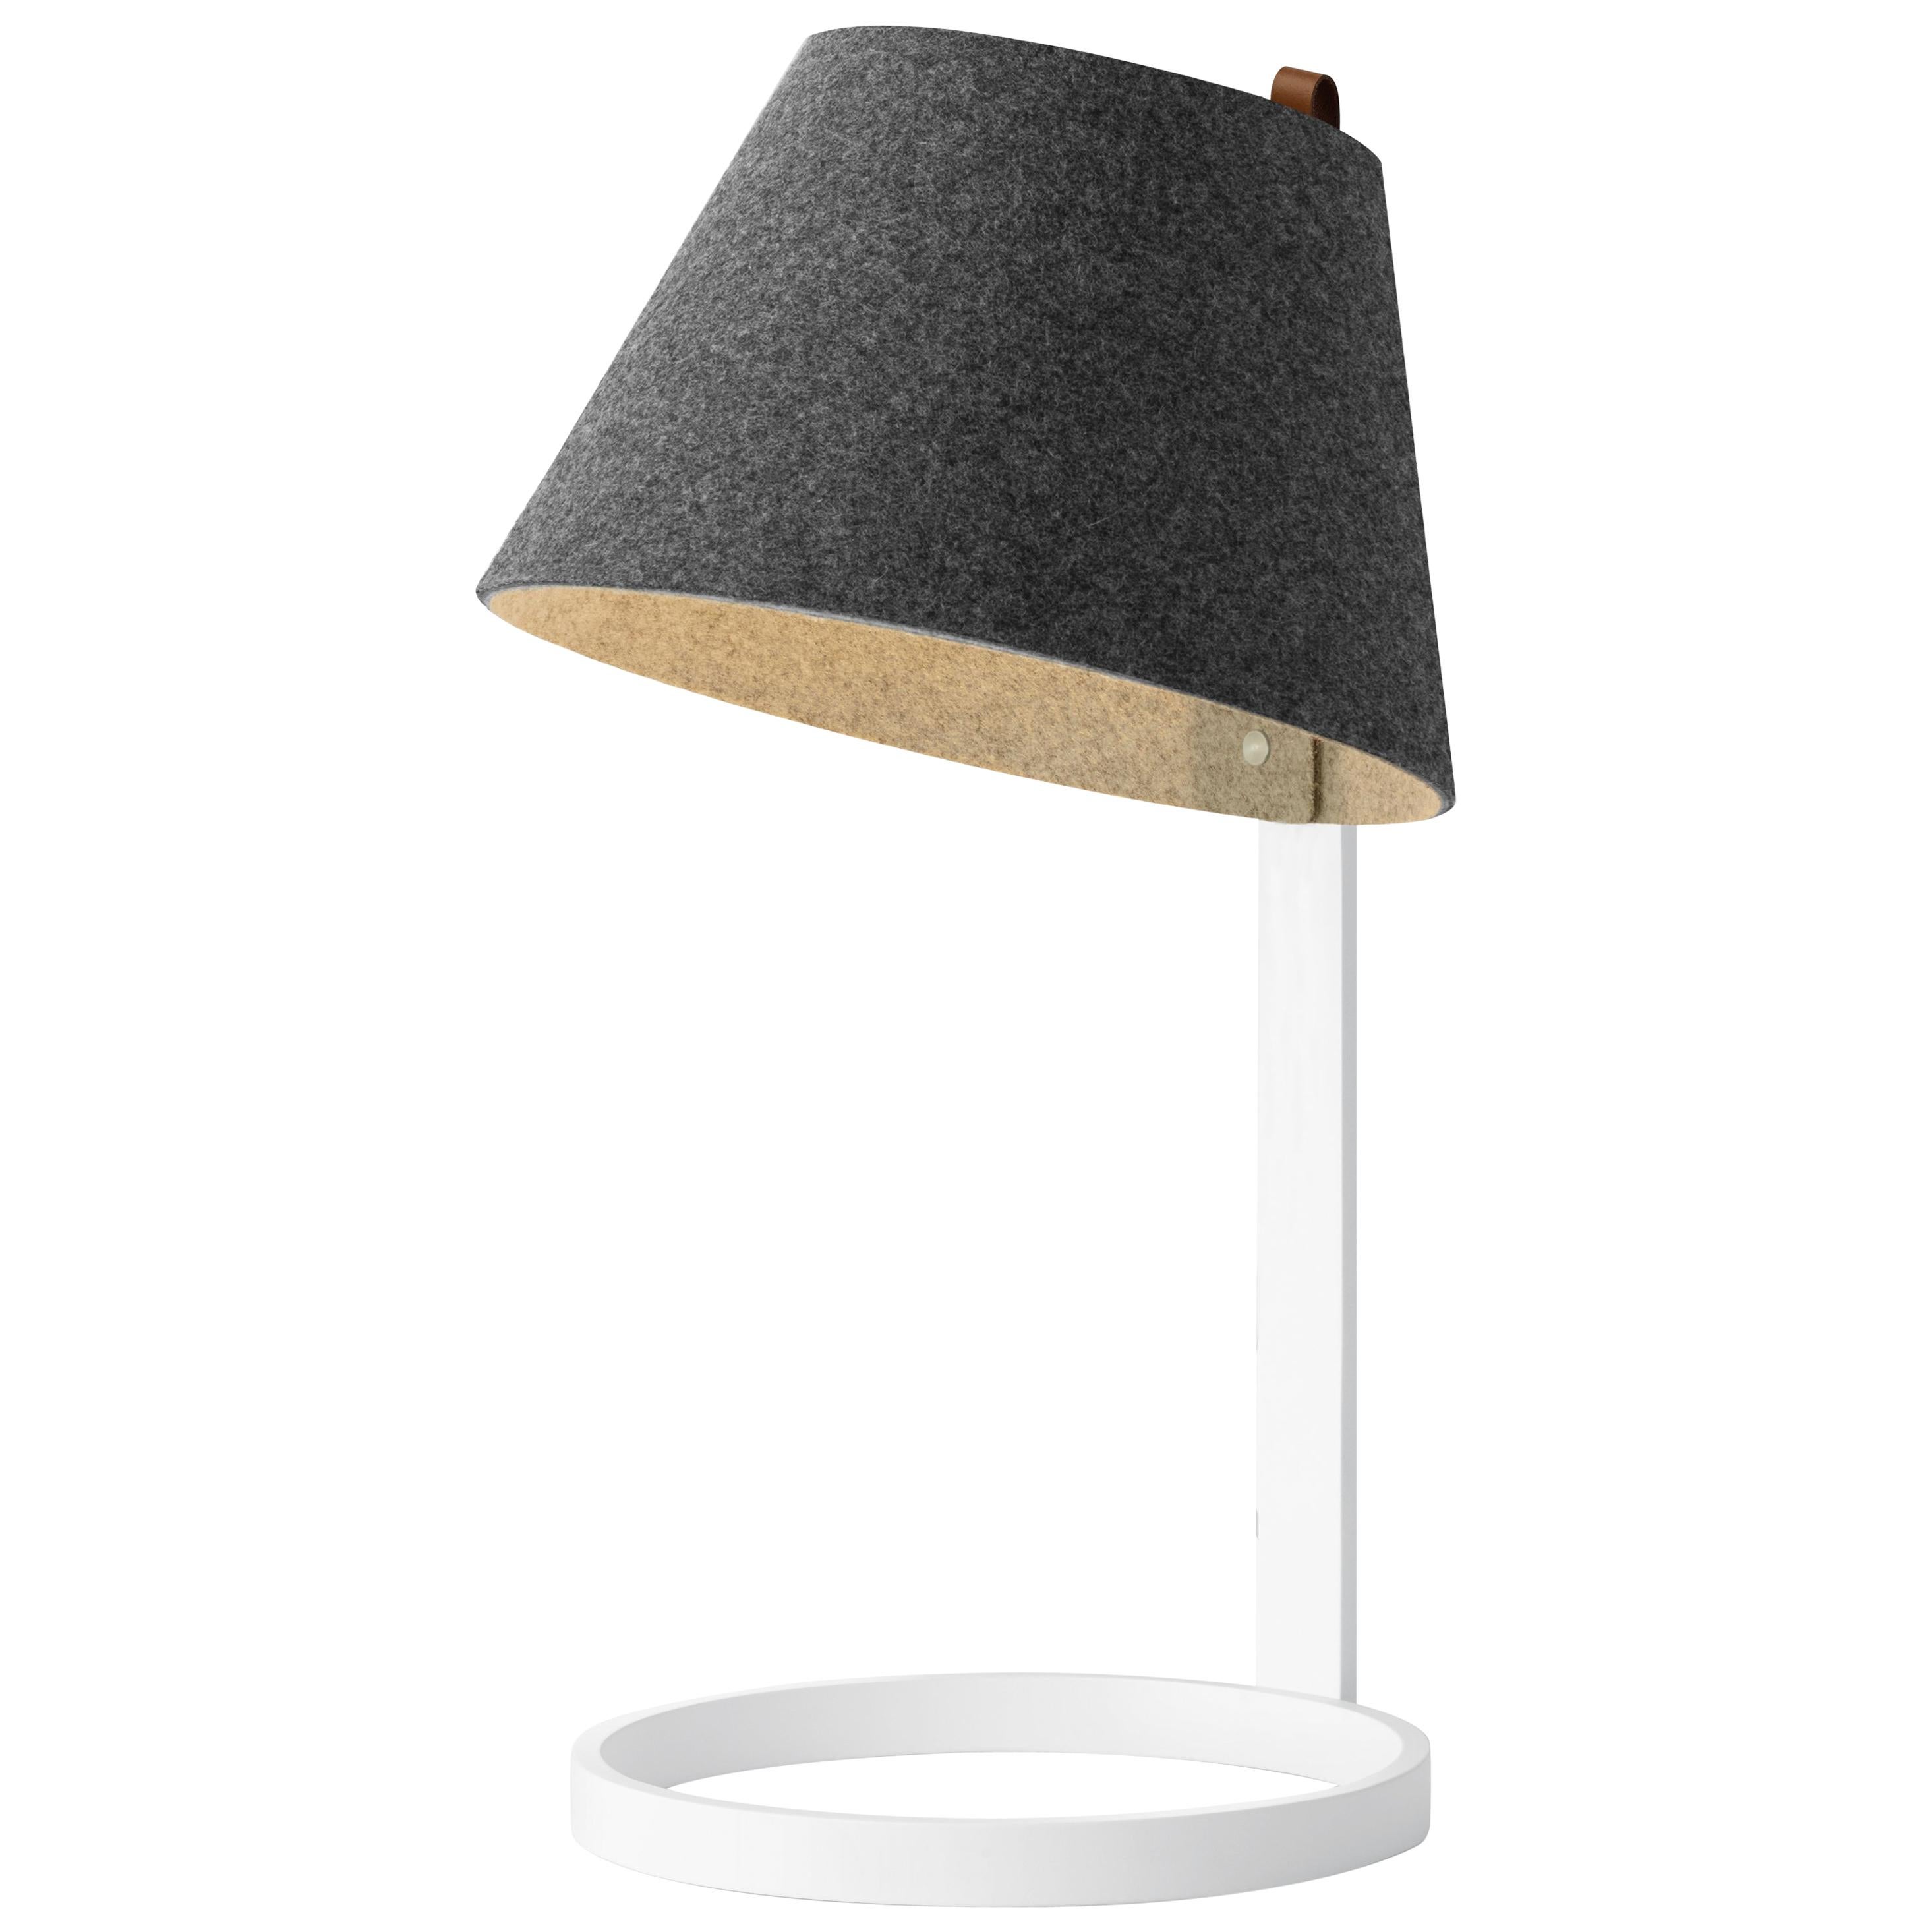 Lana Small Table Lamp in Charcoal and Grey with White Base by Pablo Designs